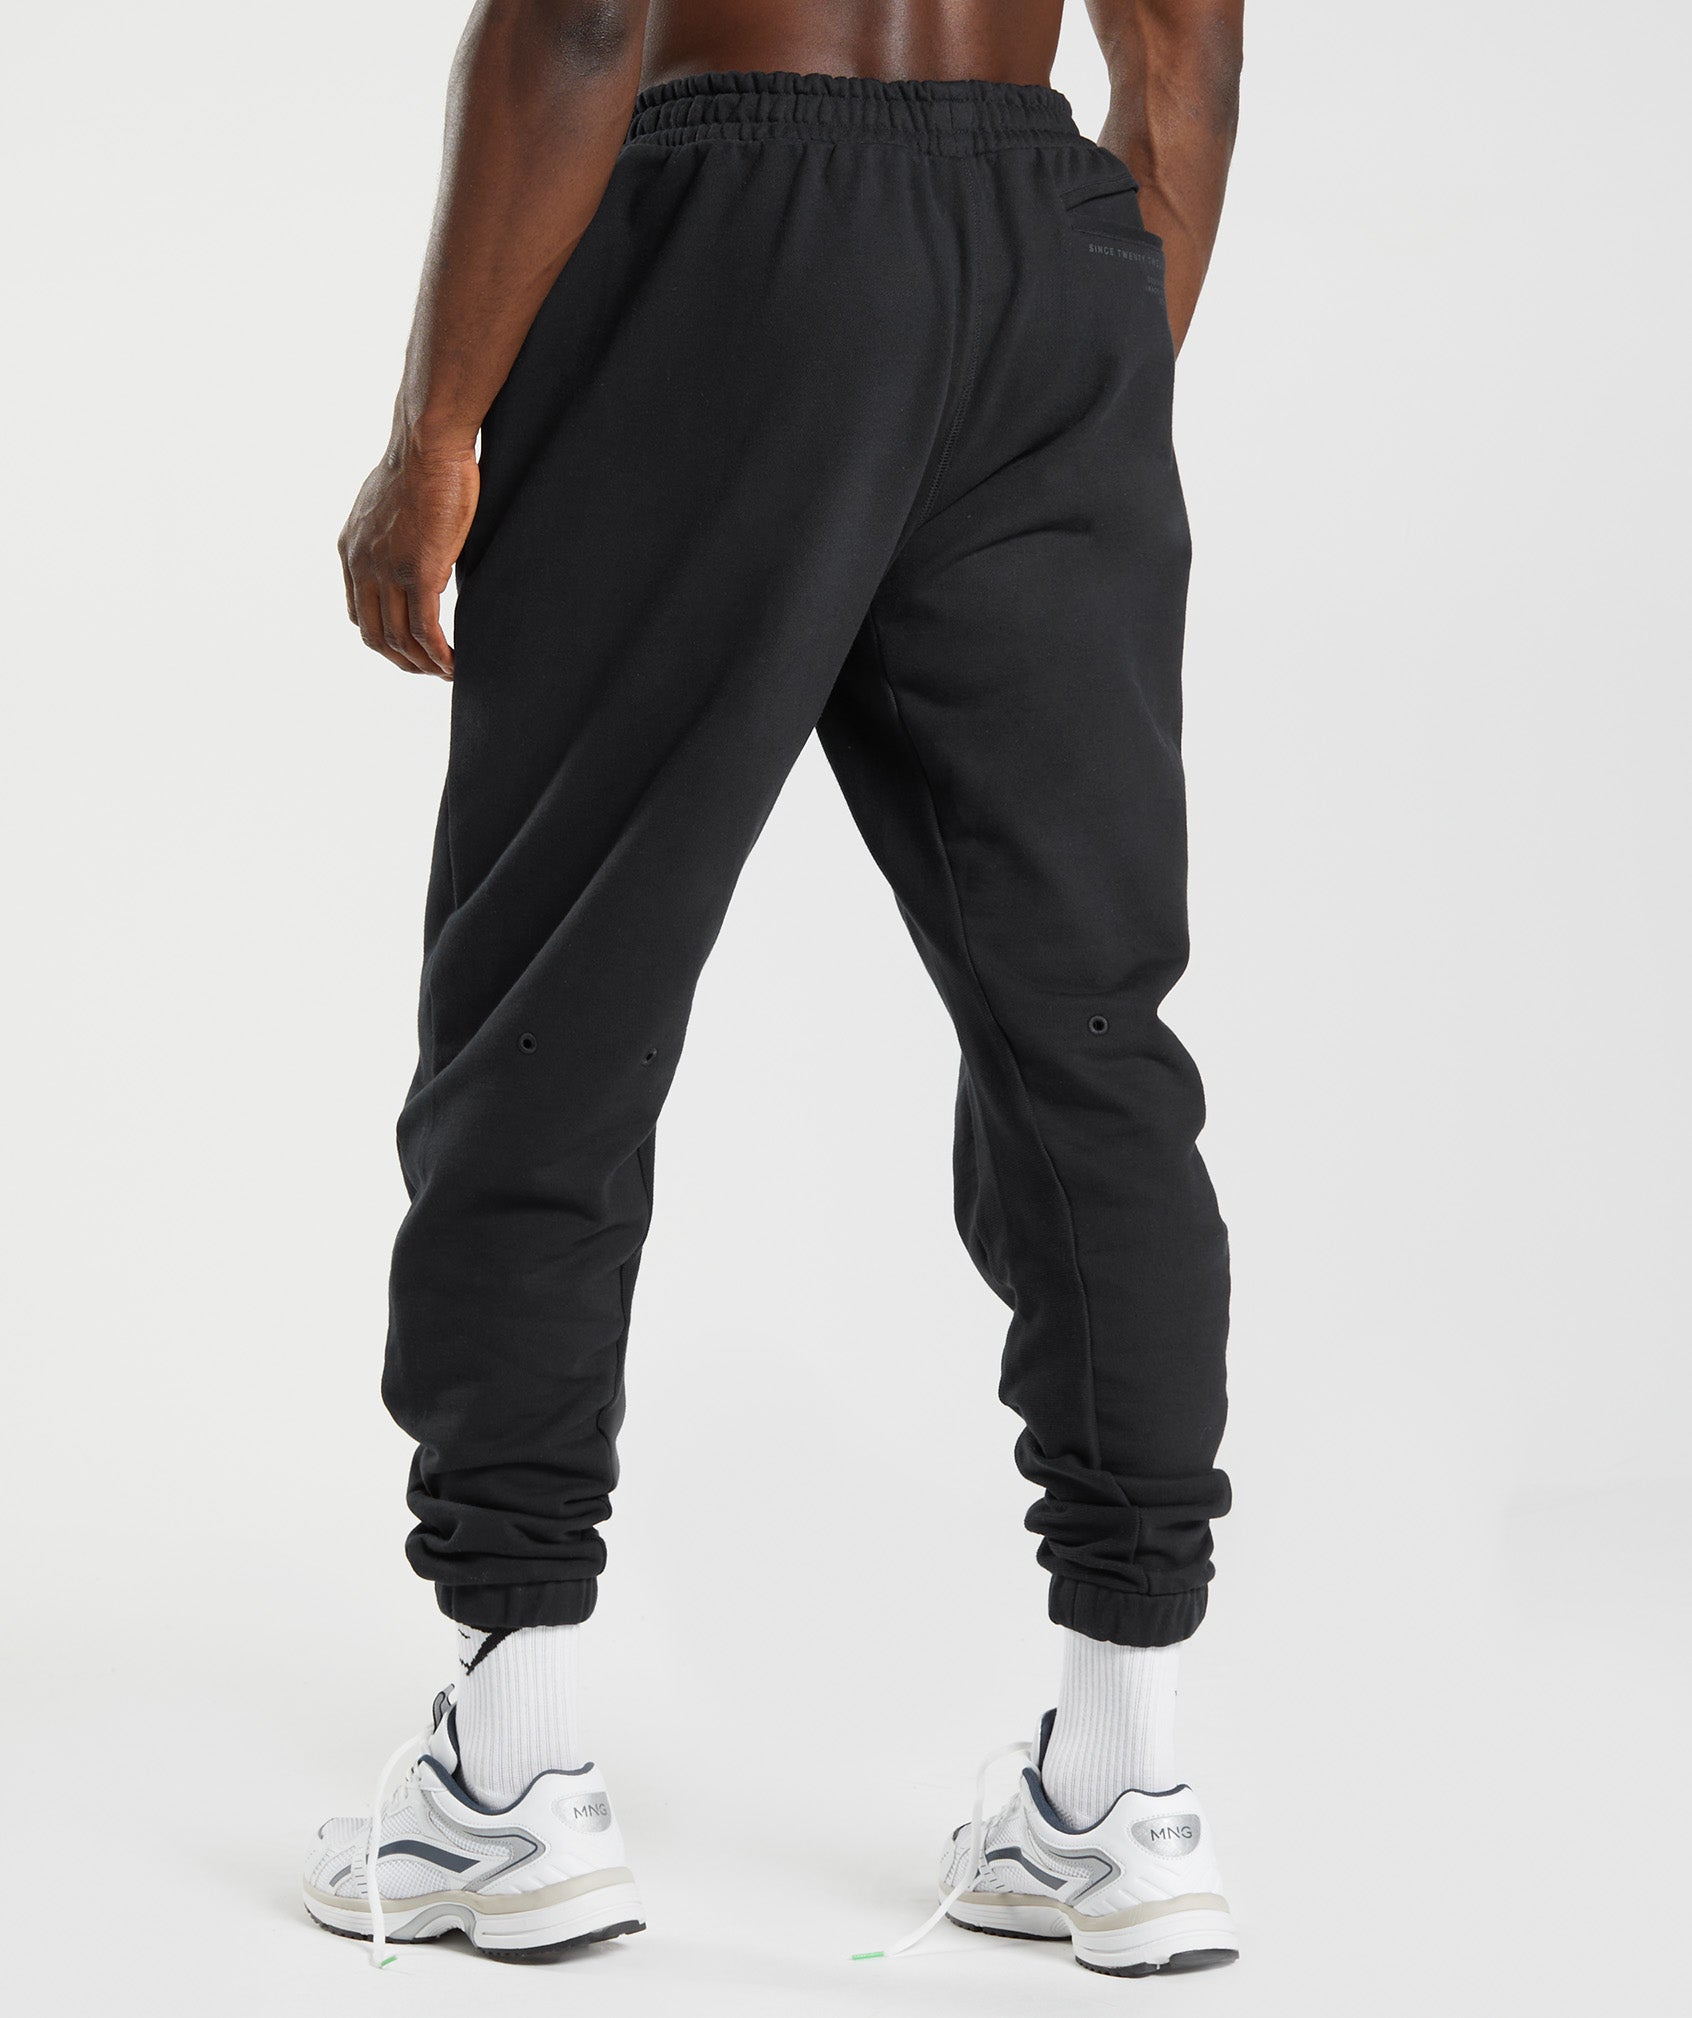 GS10 Year Joggers in Black - view 2